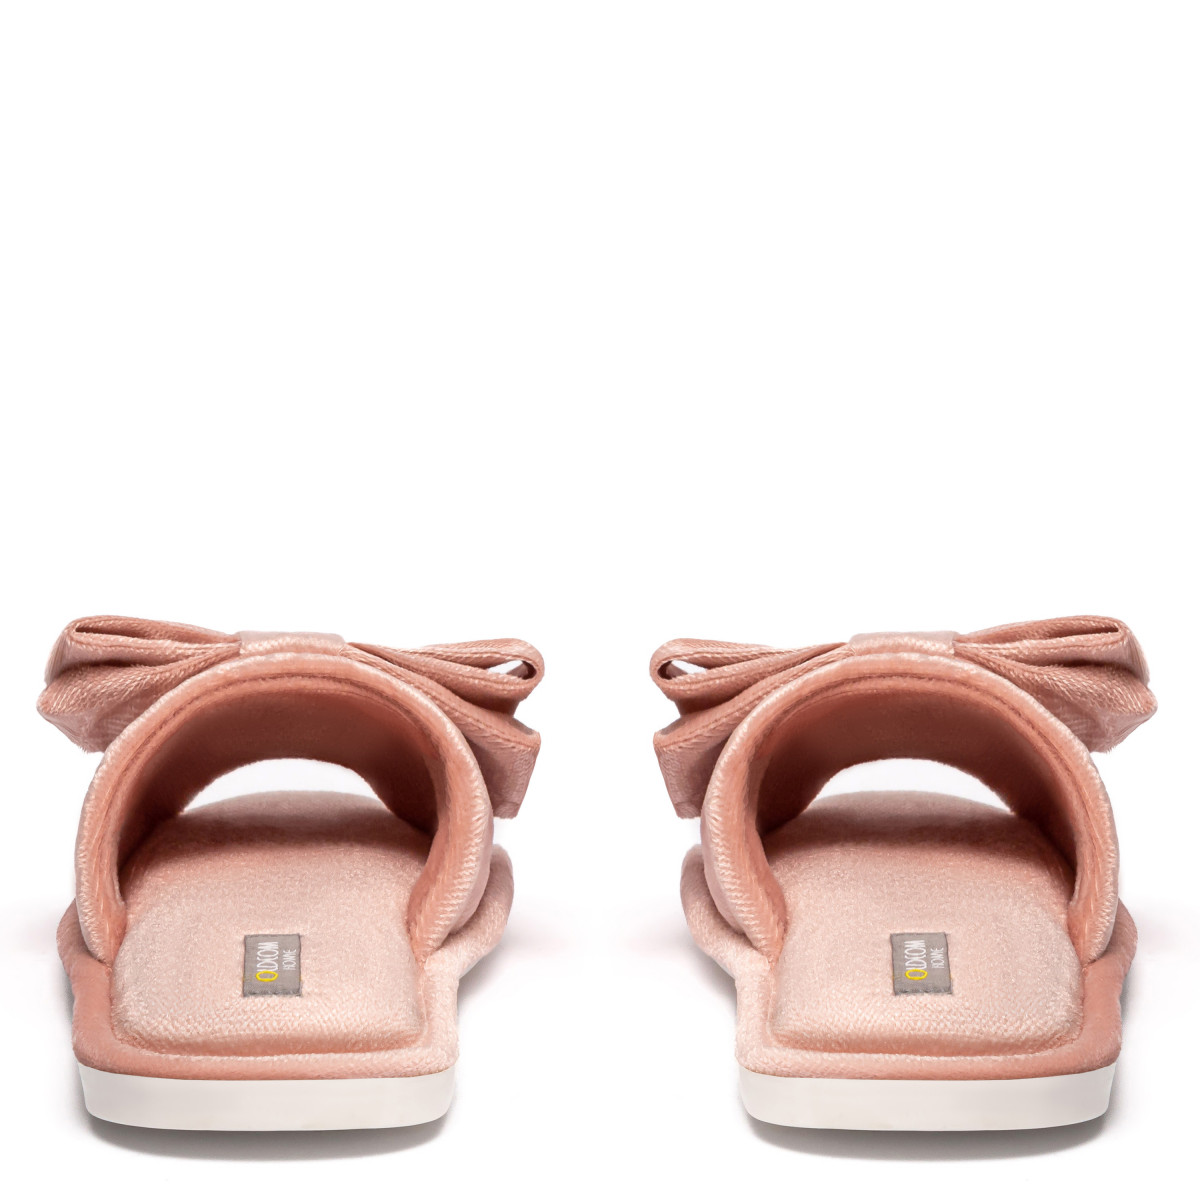 Kid's home slippers CHARM, Pale pink